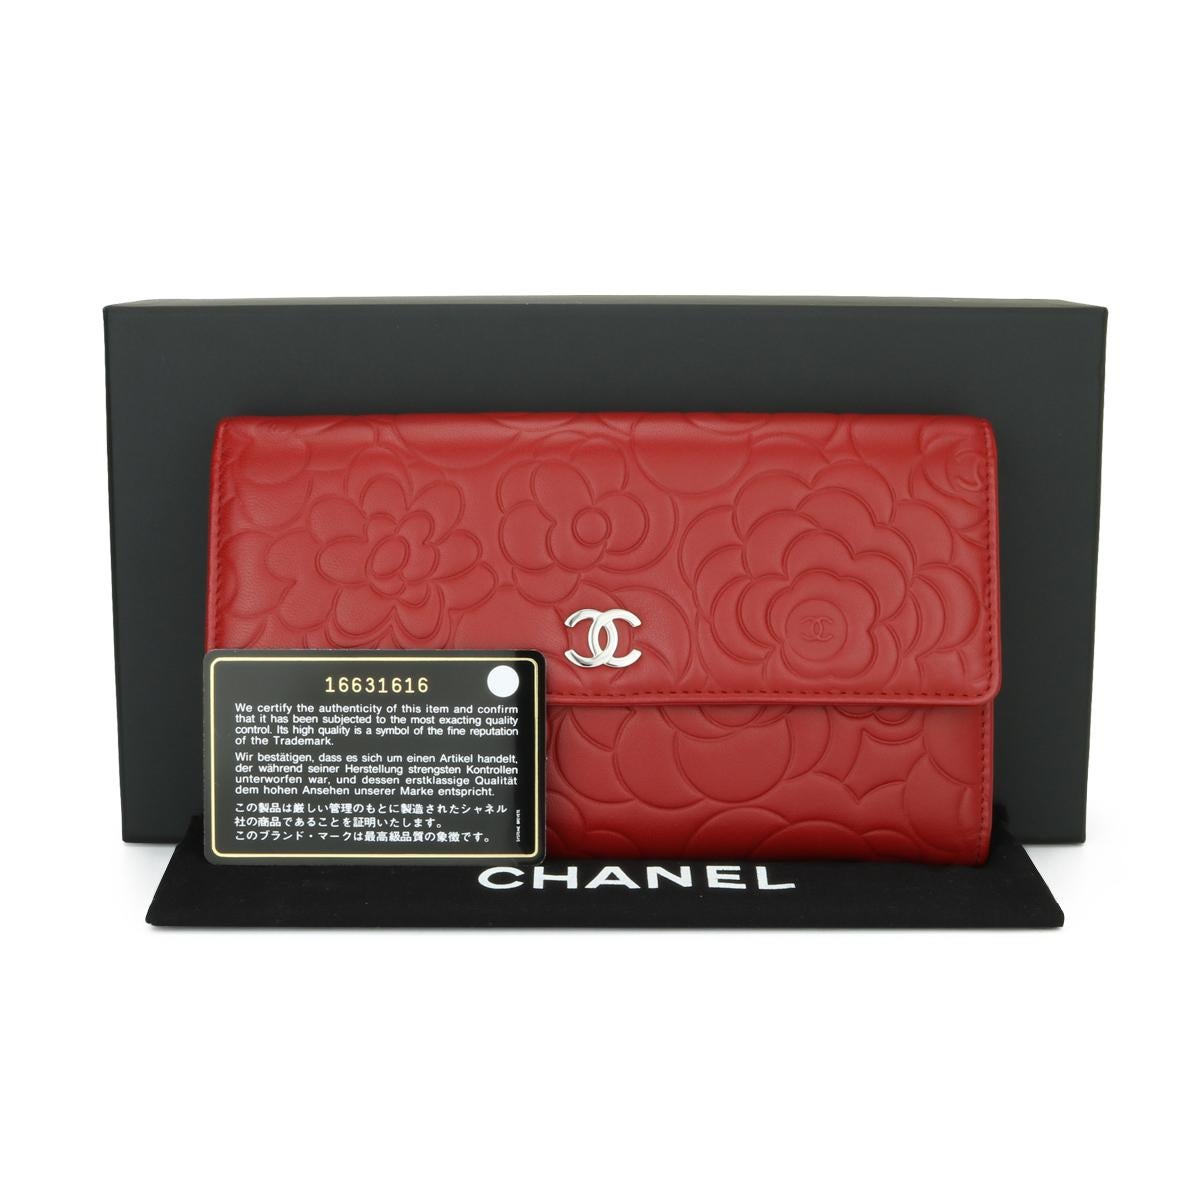 CHANEL Camellia Embossed Long Flap Wallet Red Lambskin Leather with Silver Hardware 2012.

This stunning Tri-Fold Flap wallet is in excellent condition, the wallet still holds its original shape, and the hardware is still very shiny.

- Exterior